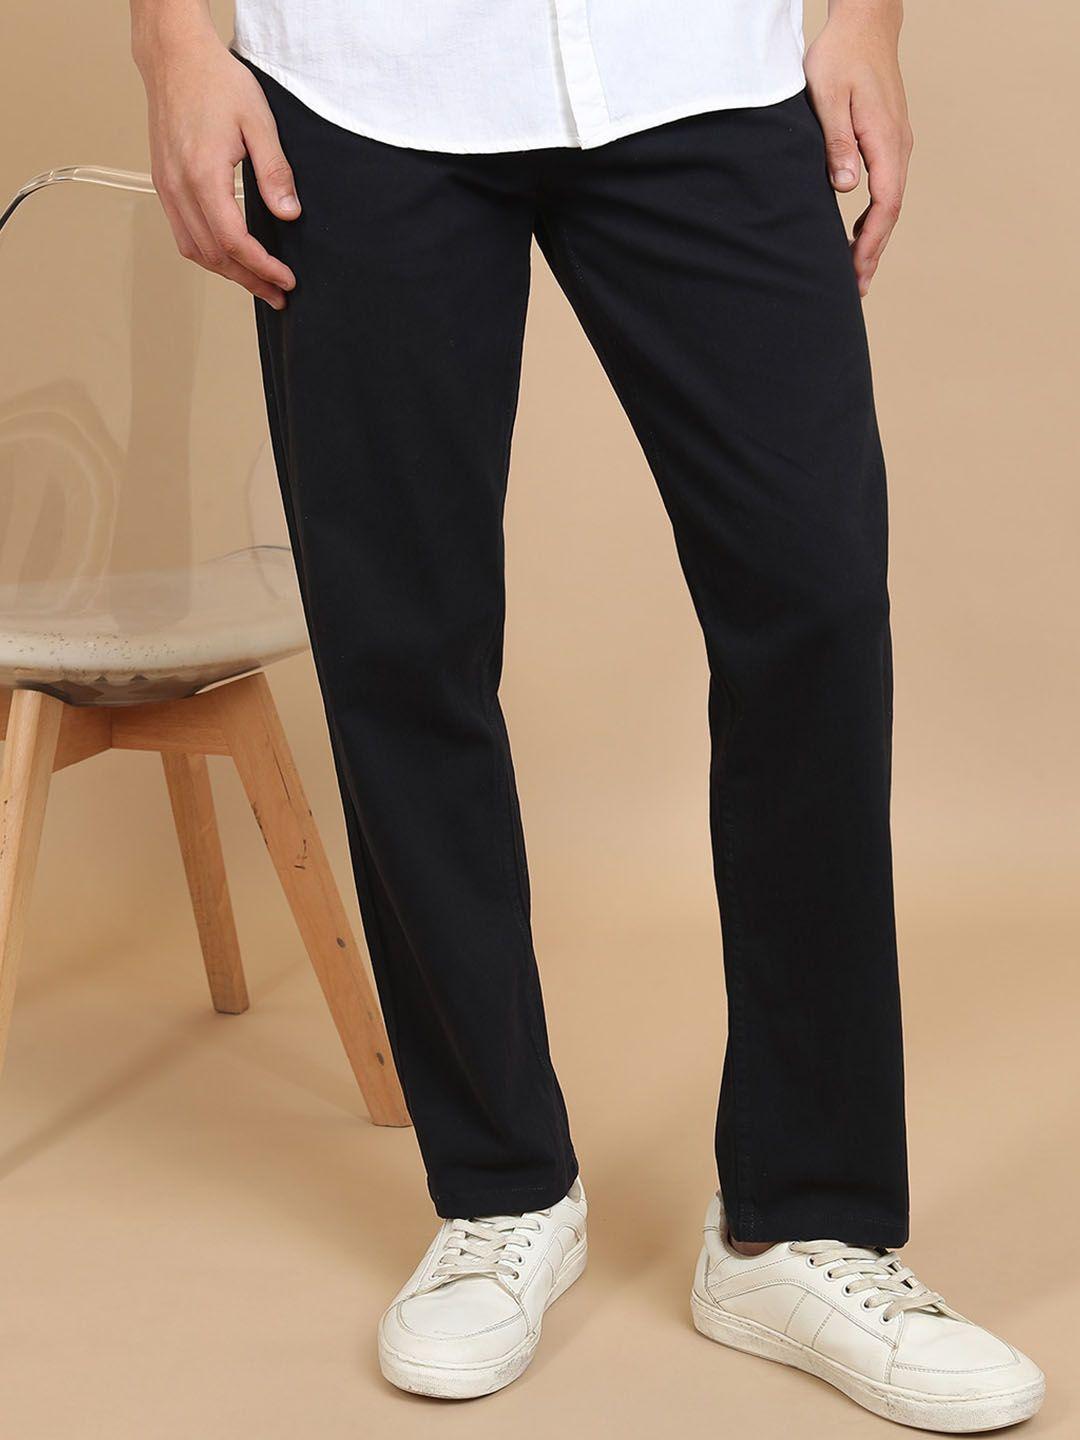 highlander-men-navy-blue-mid-rise-chinos-trousers